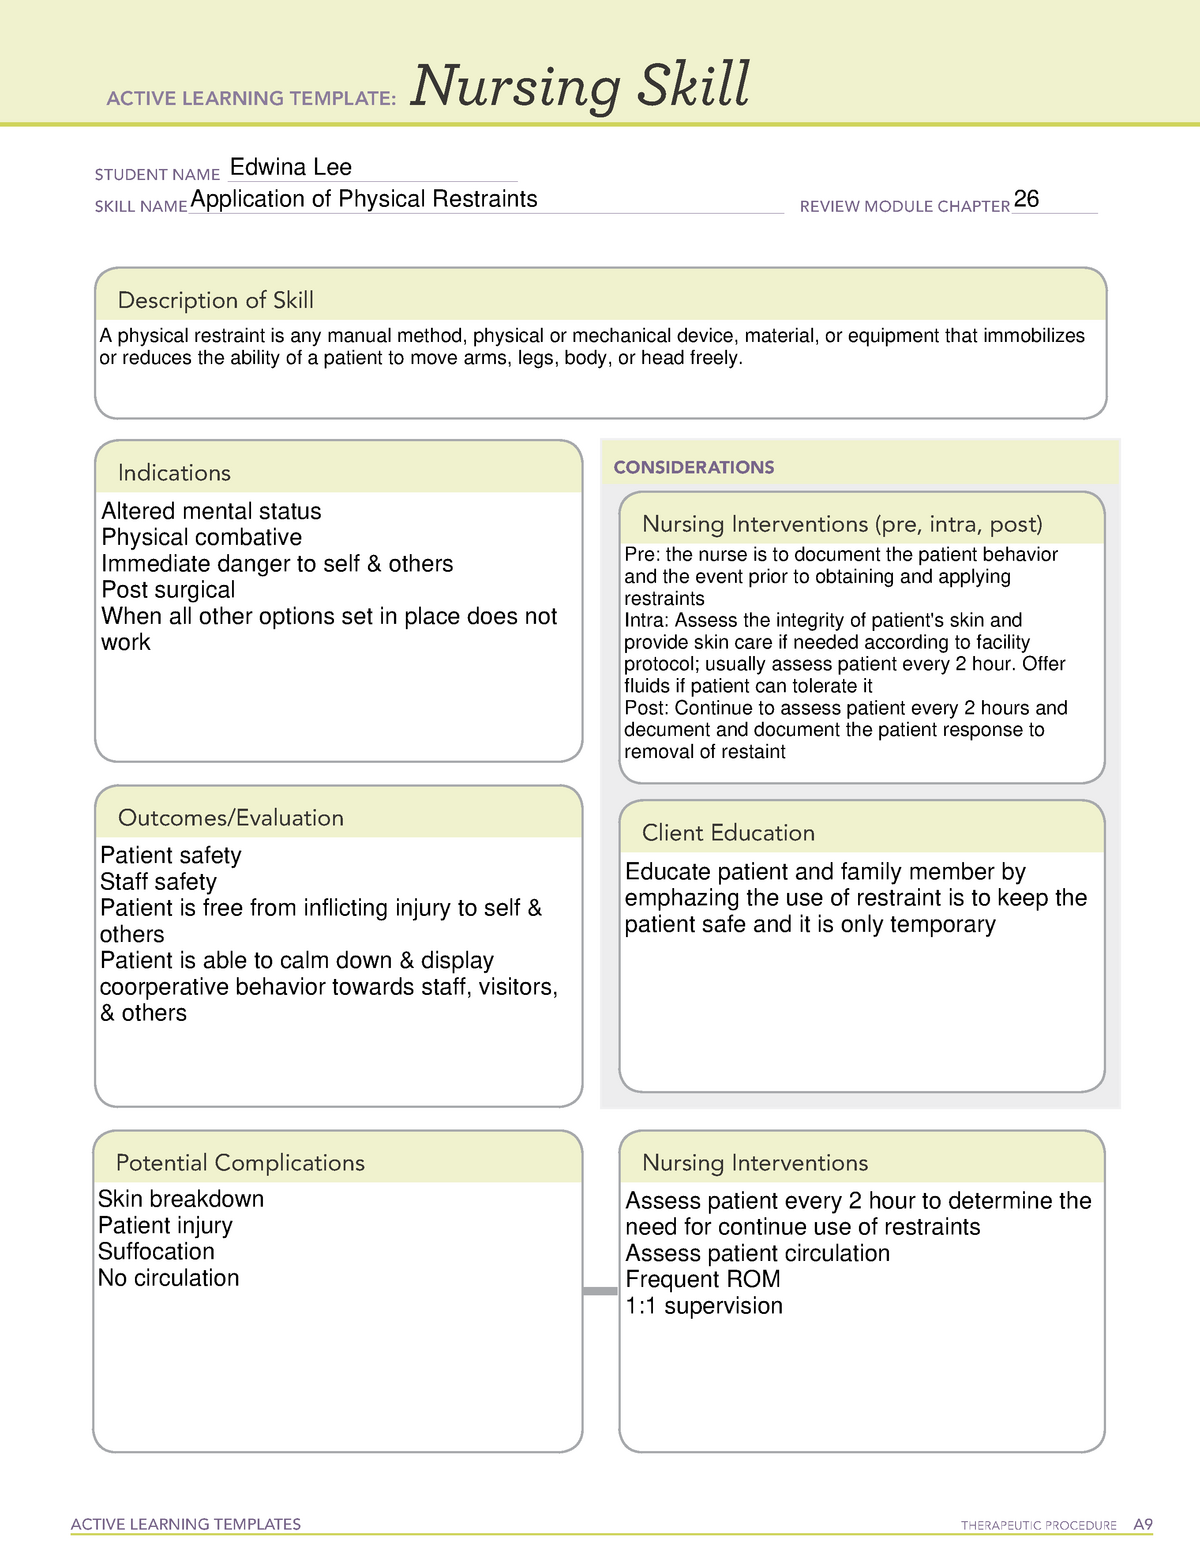 Active Learning Template Nursing Skill Restraints - ACTIVE LEARNING